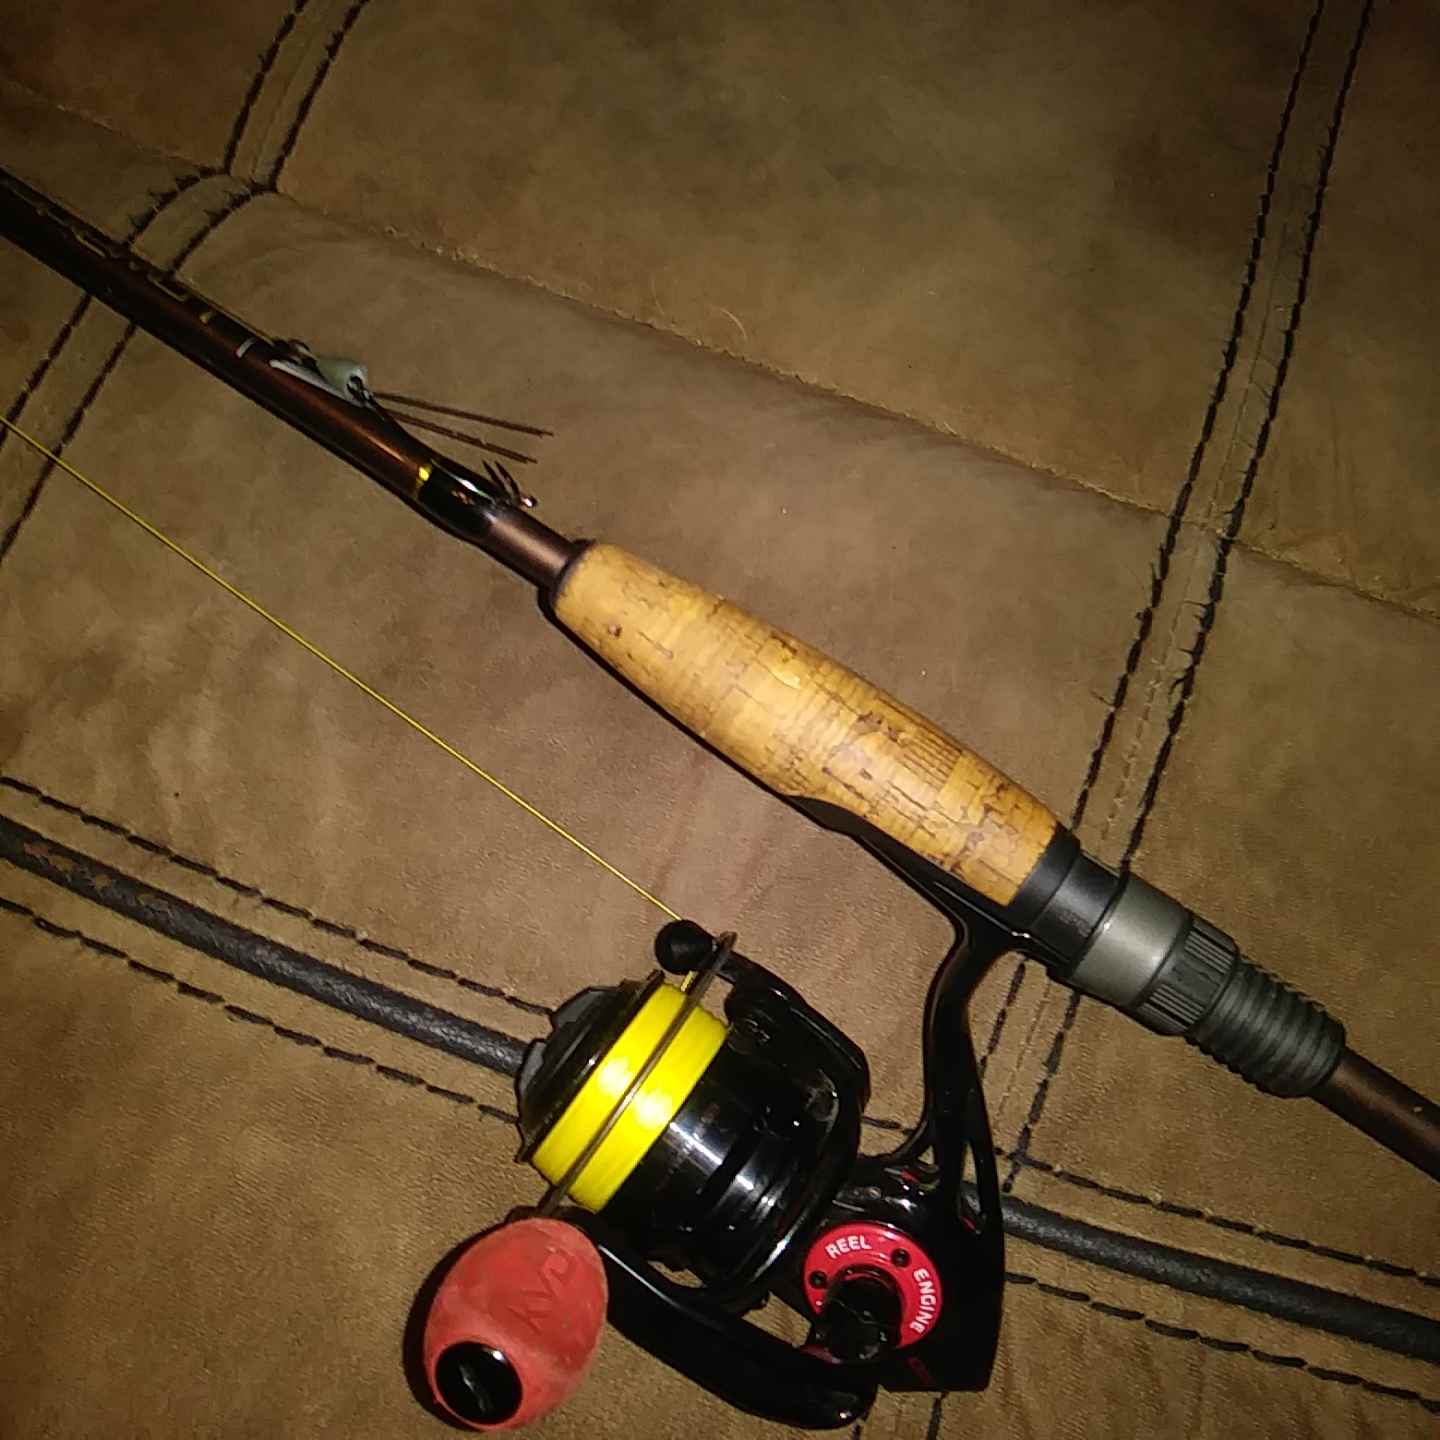 Spinning - Rods  Price: $100.00 - $200.00; Action: Extra Fast